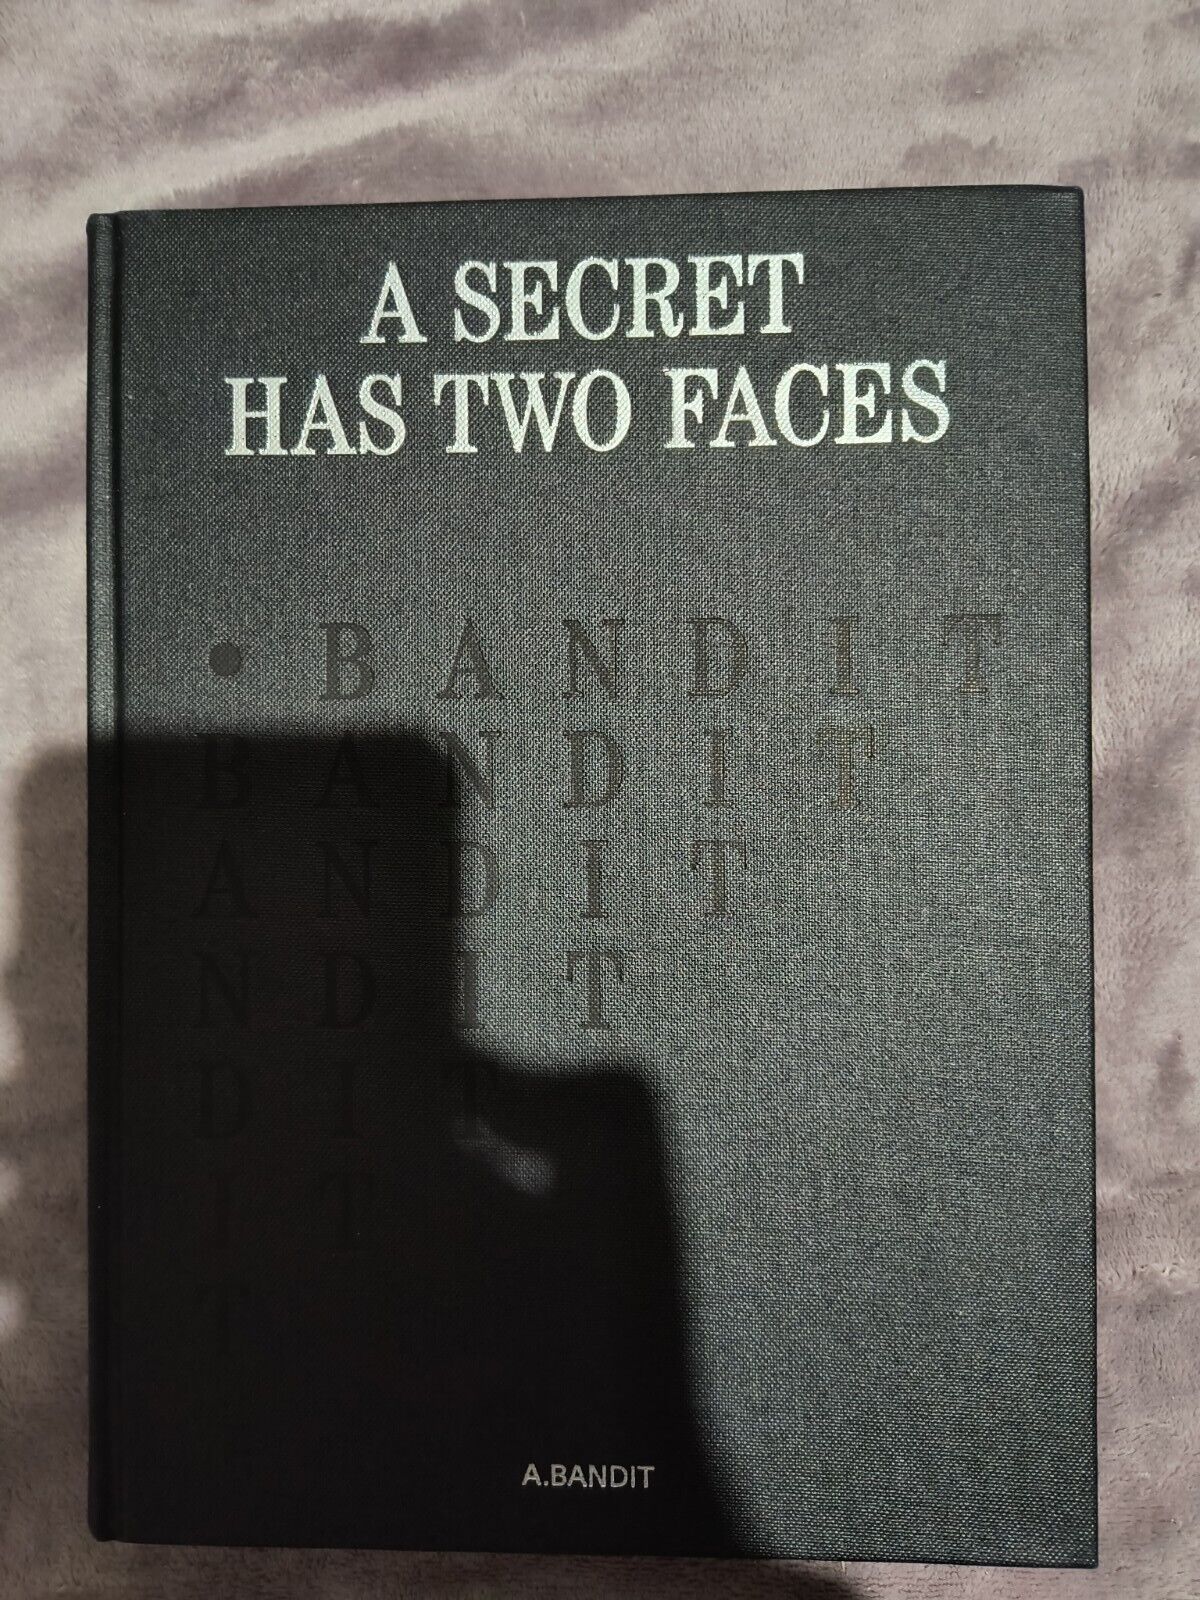 A Secret Has Two Faces - A Bandit - By Derek Delgaudio And Glenn Kaino - Signed